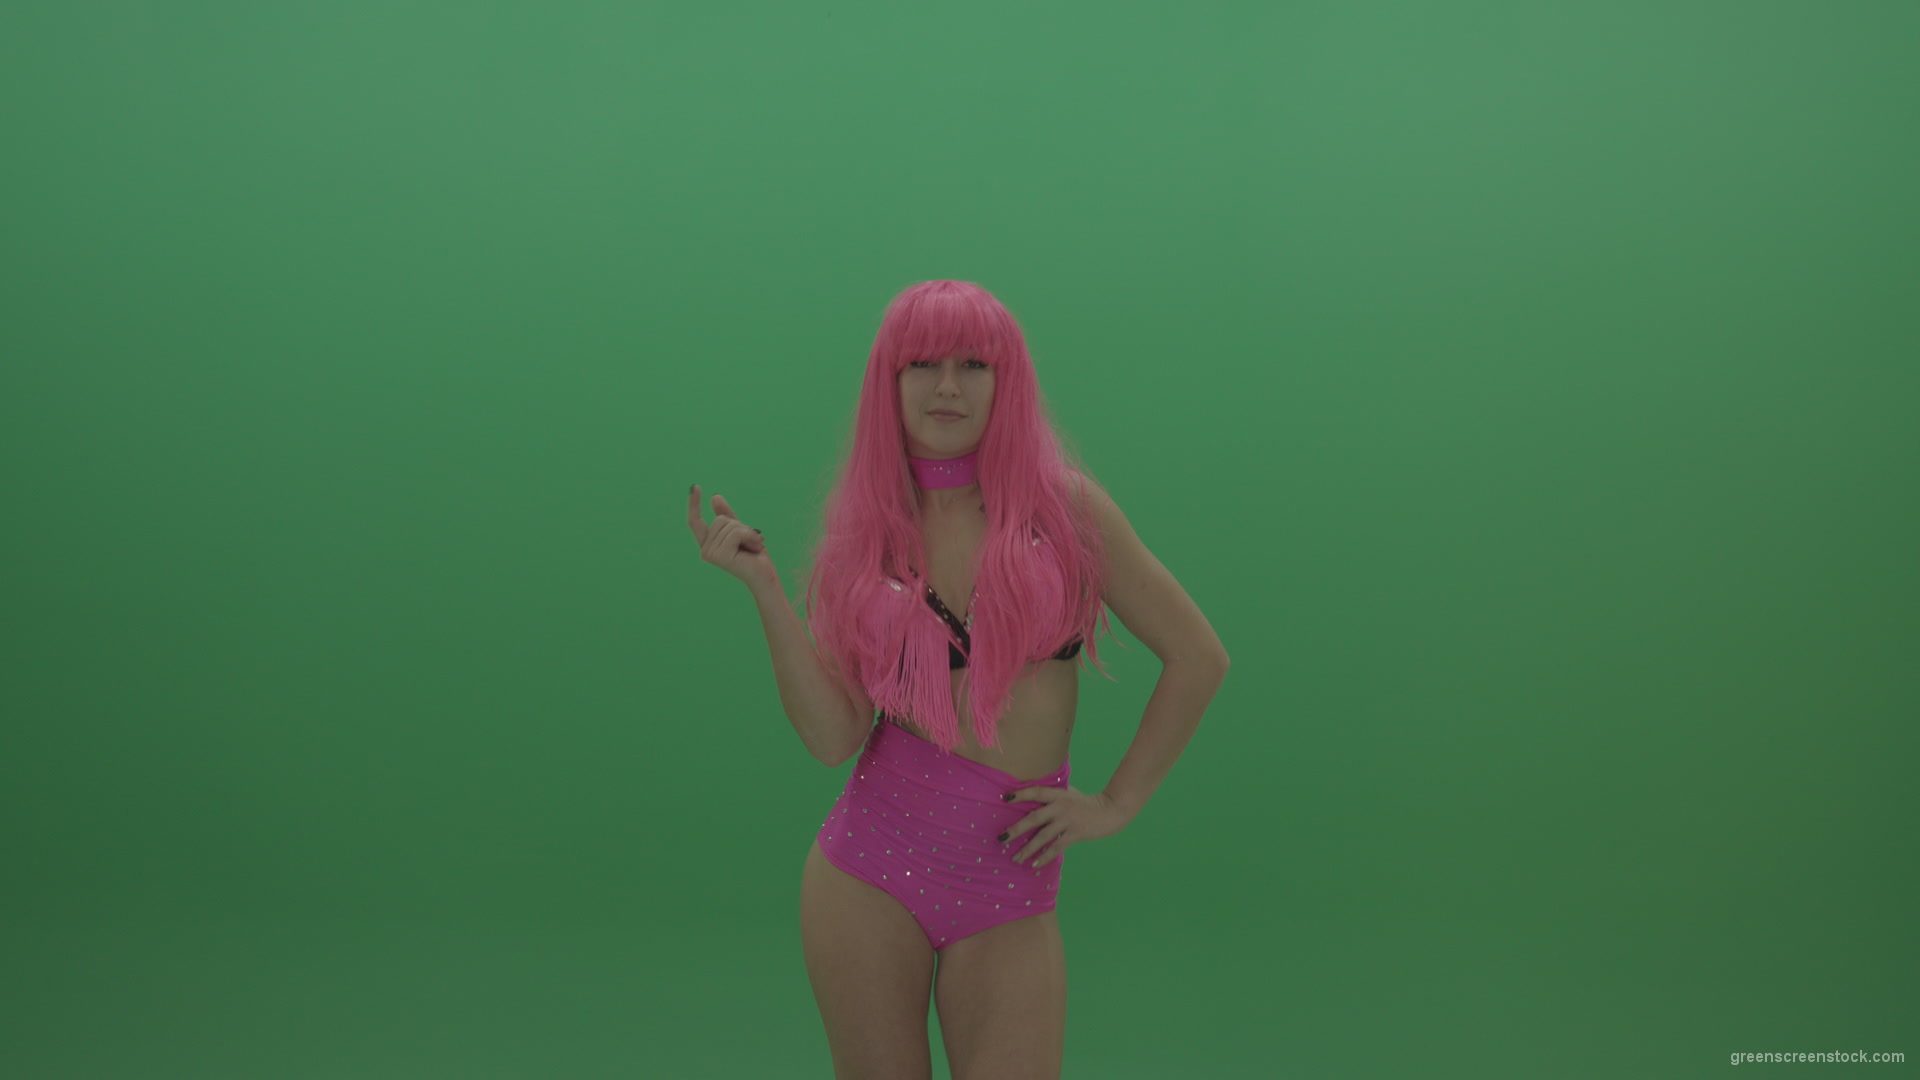 Gogo-dancer-in-pink-displays-an-amazing-pose-over-chromakey-background_005 Green Screen Stock